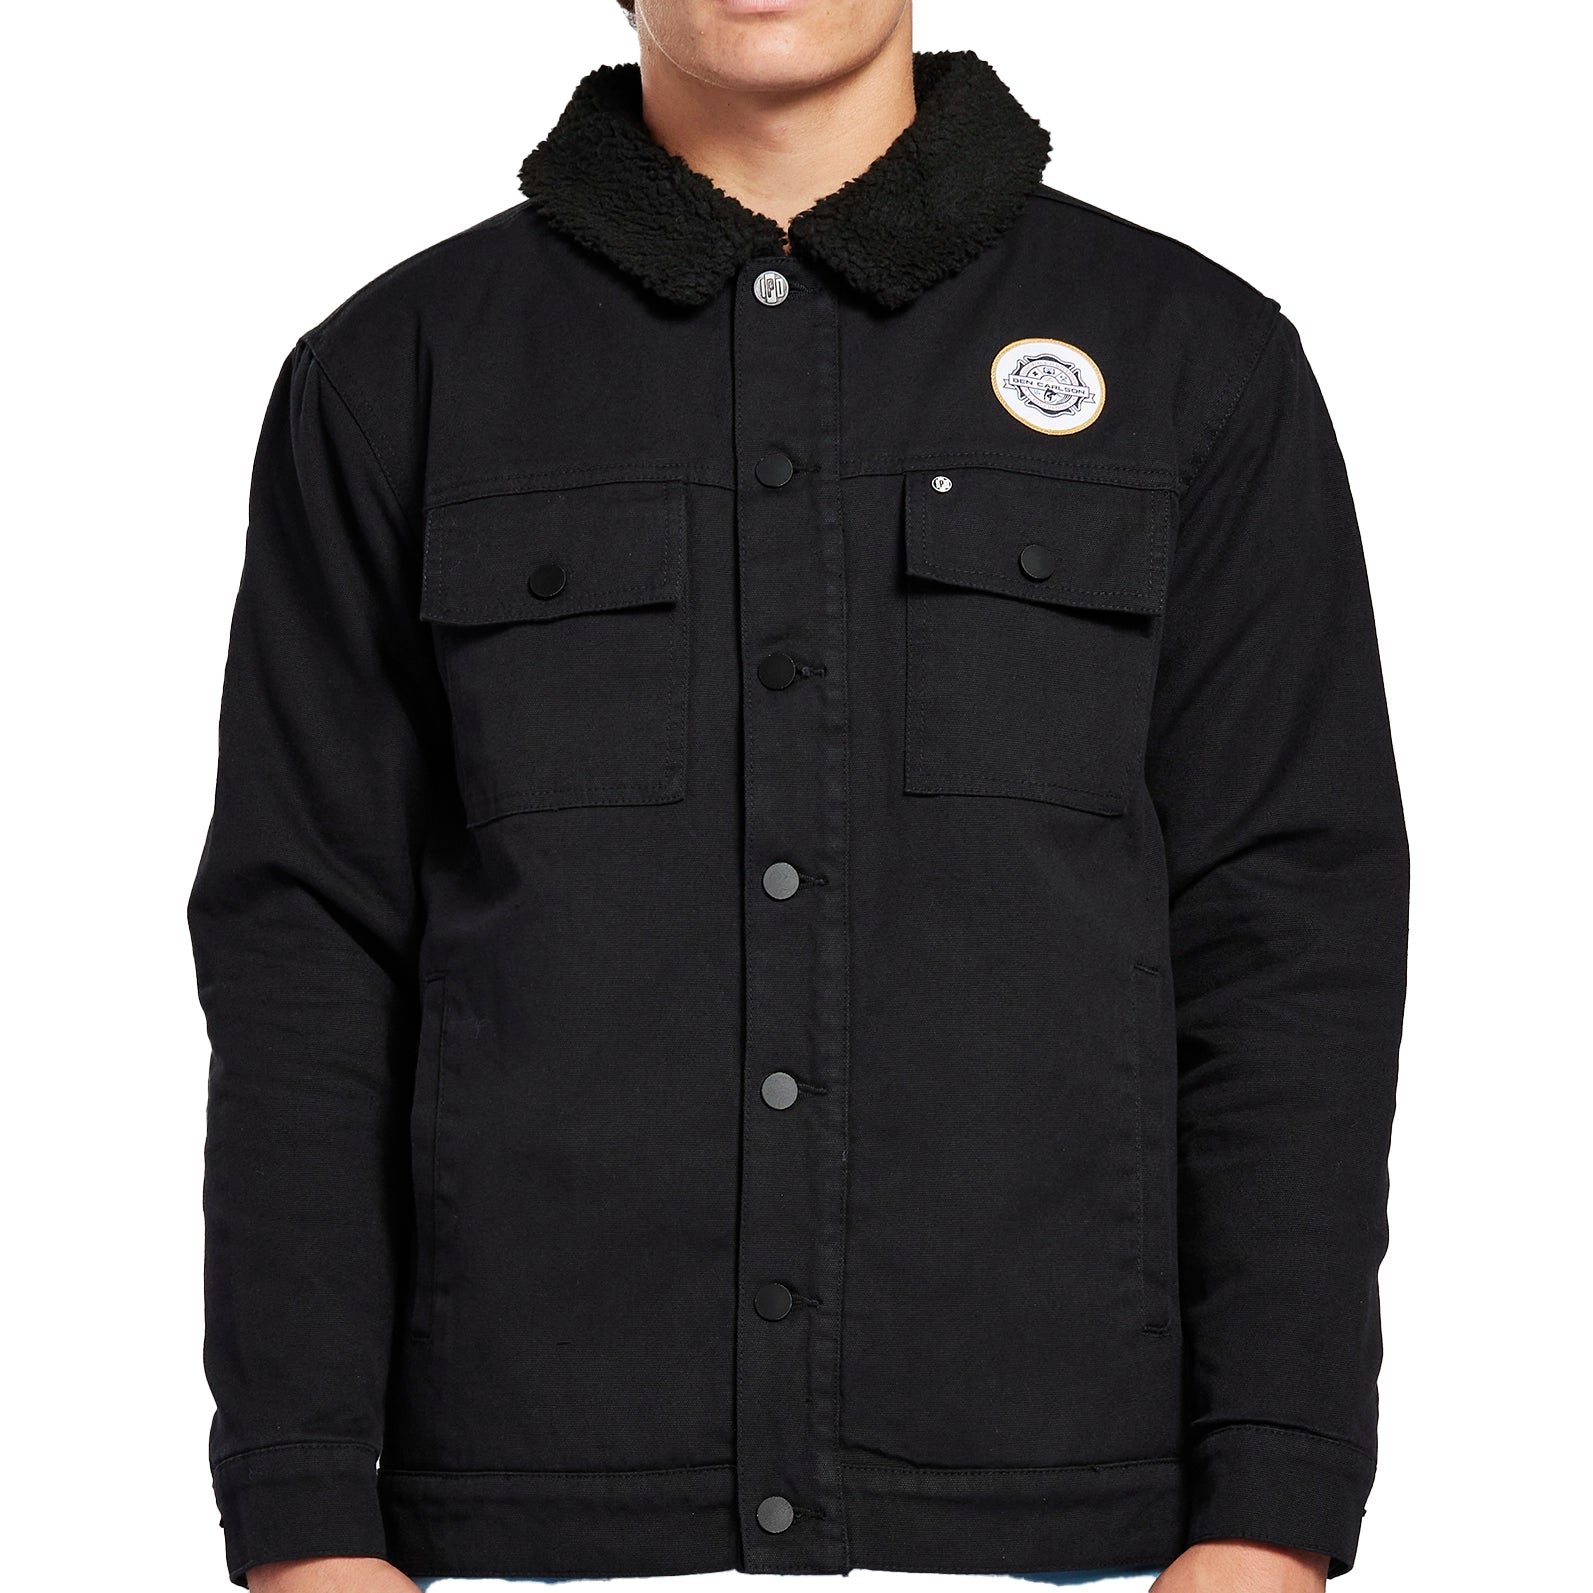 Front view of a black long sleeve heavyweight cotton button up jacket. It has a thick, cotton-lined collar with two patch flap pockets on each side of the chest. Above the left pocket is a white circular patch.